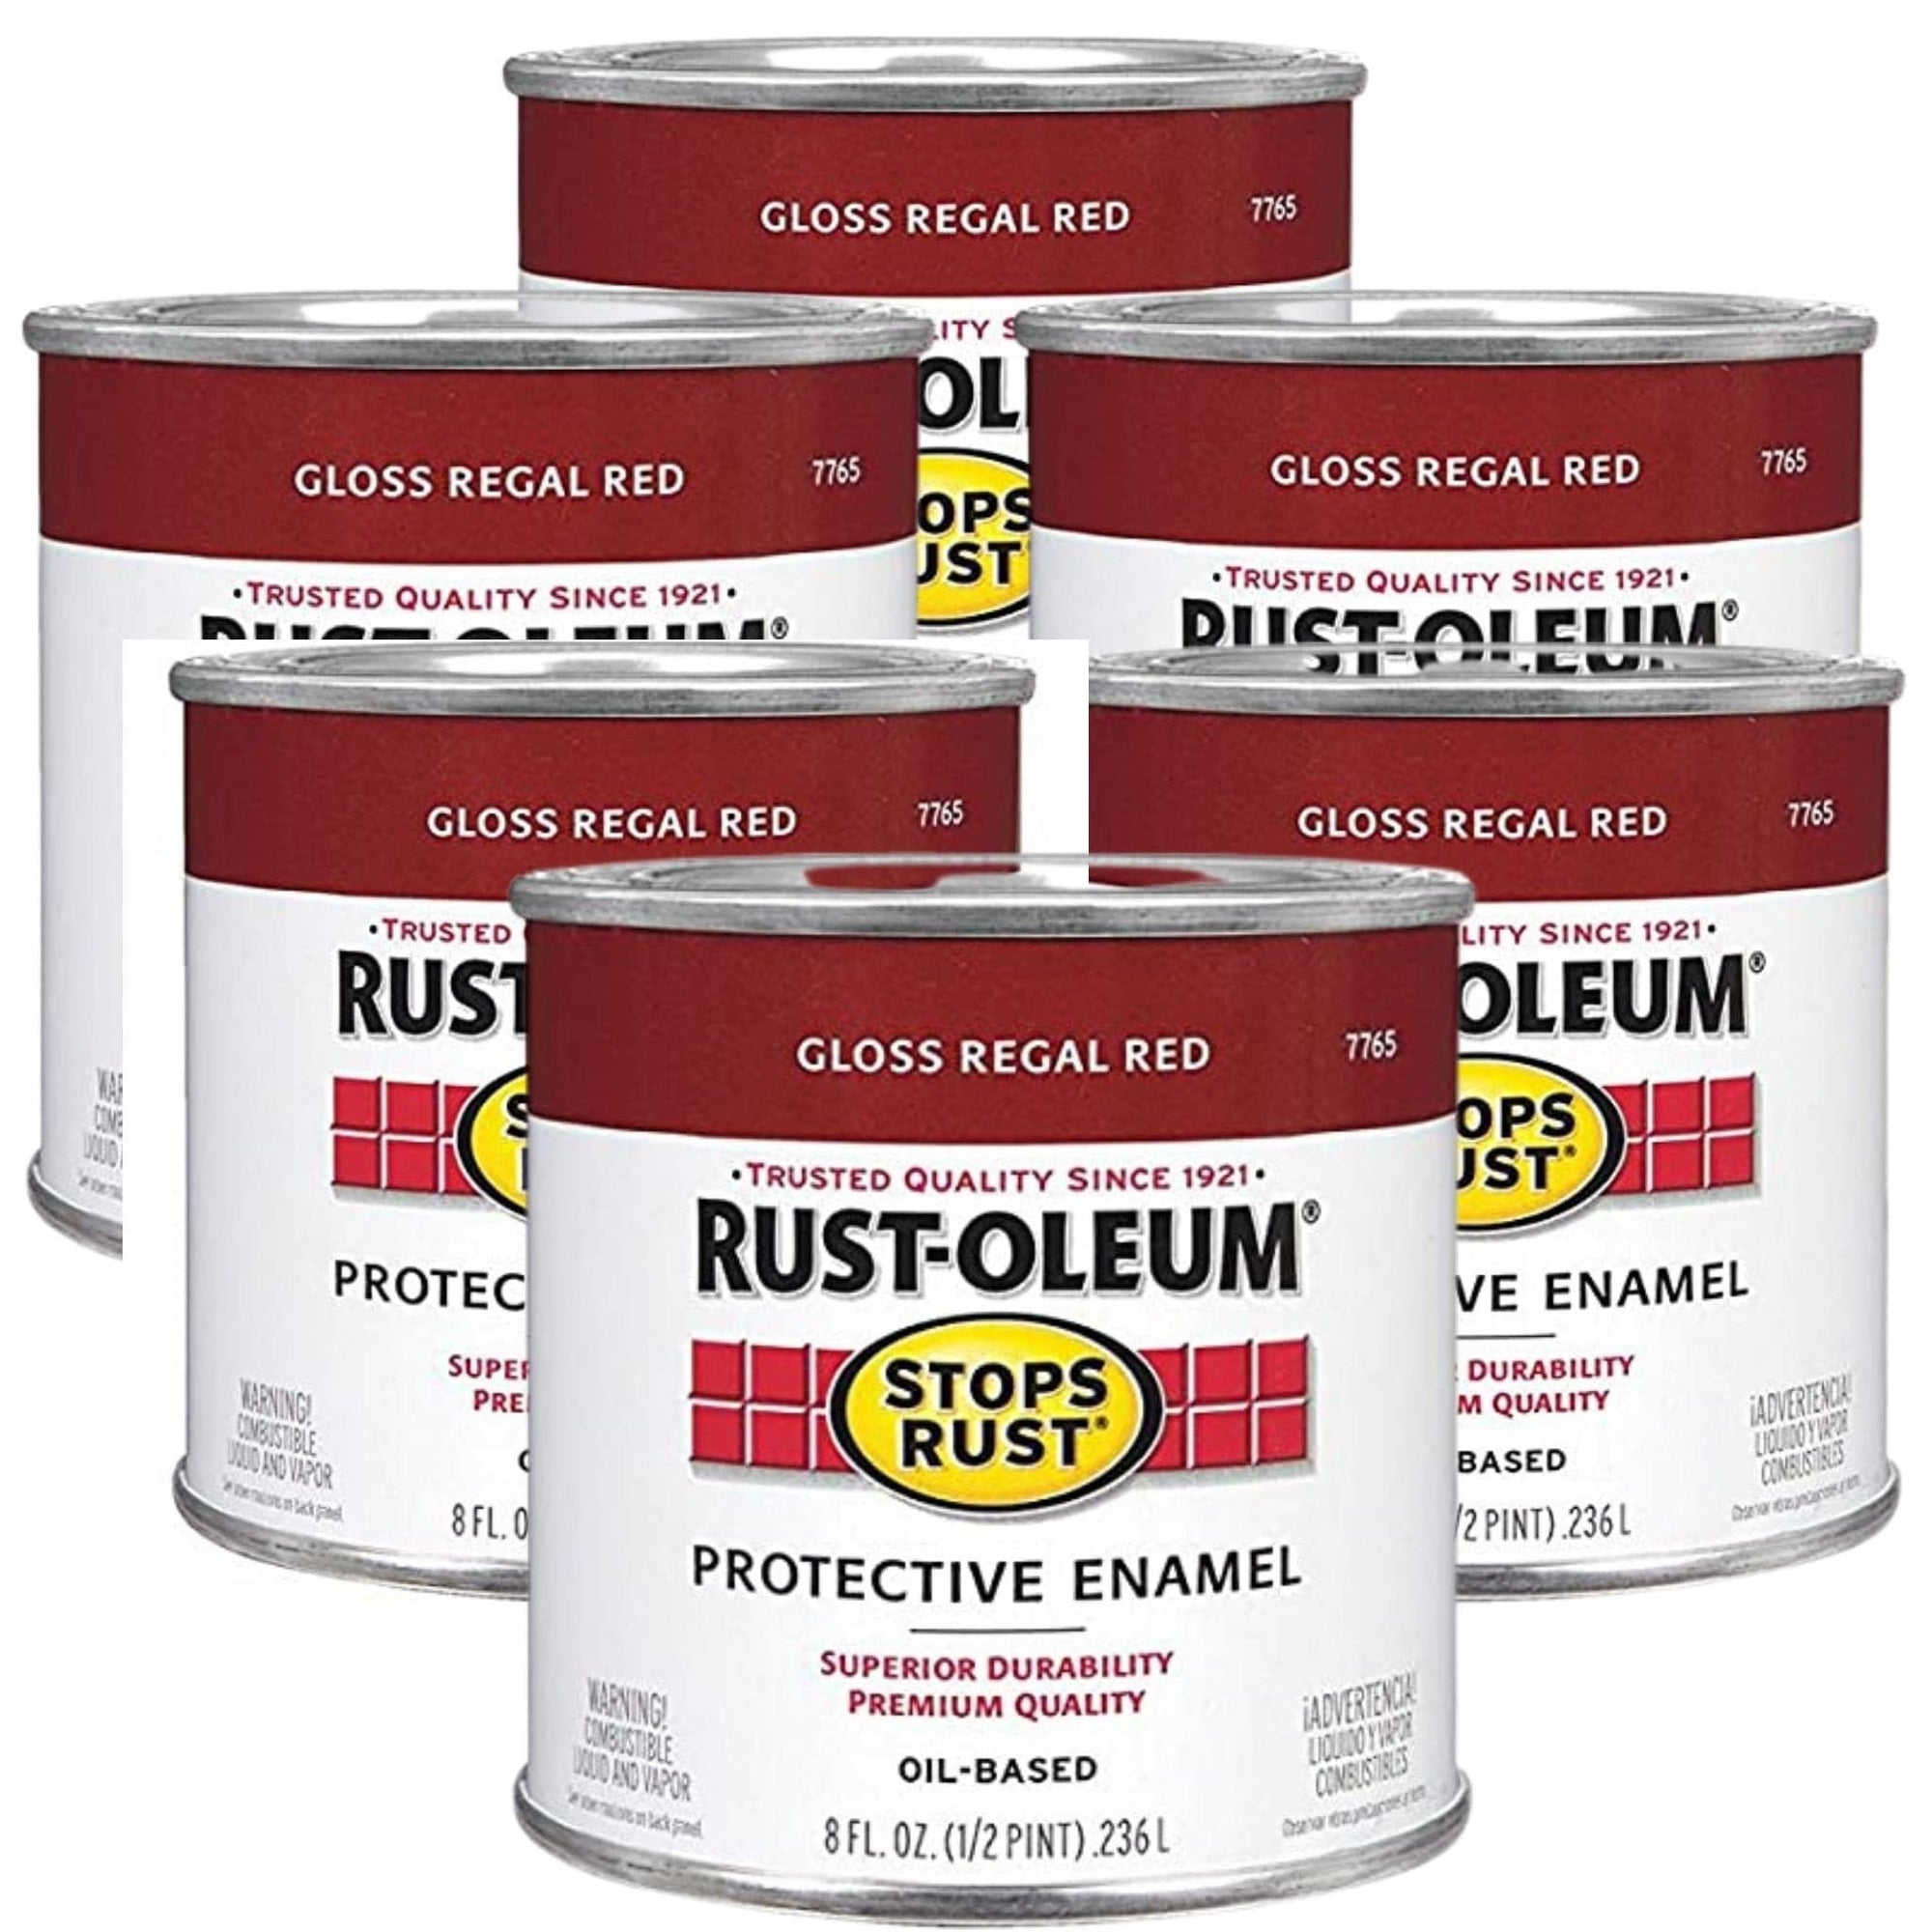 (6 Pack) Rustoleum Stops Rust Protective Enamel Paint 236ml - GLOSS REGAL RED - South East Clearance Centre